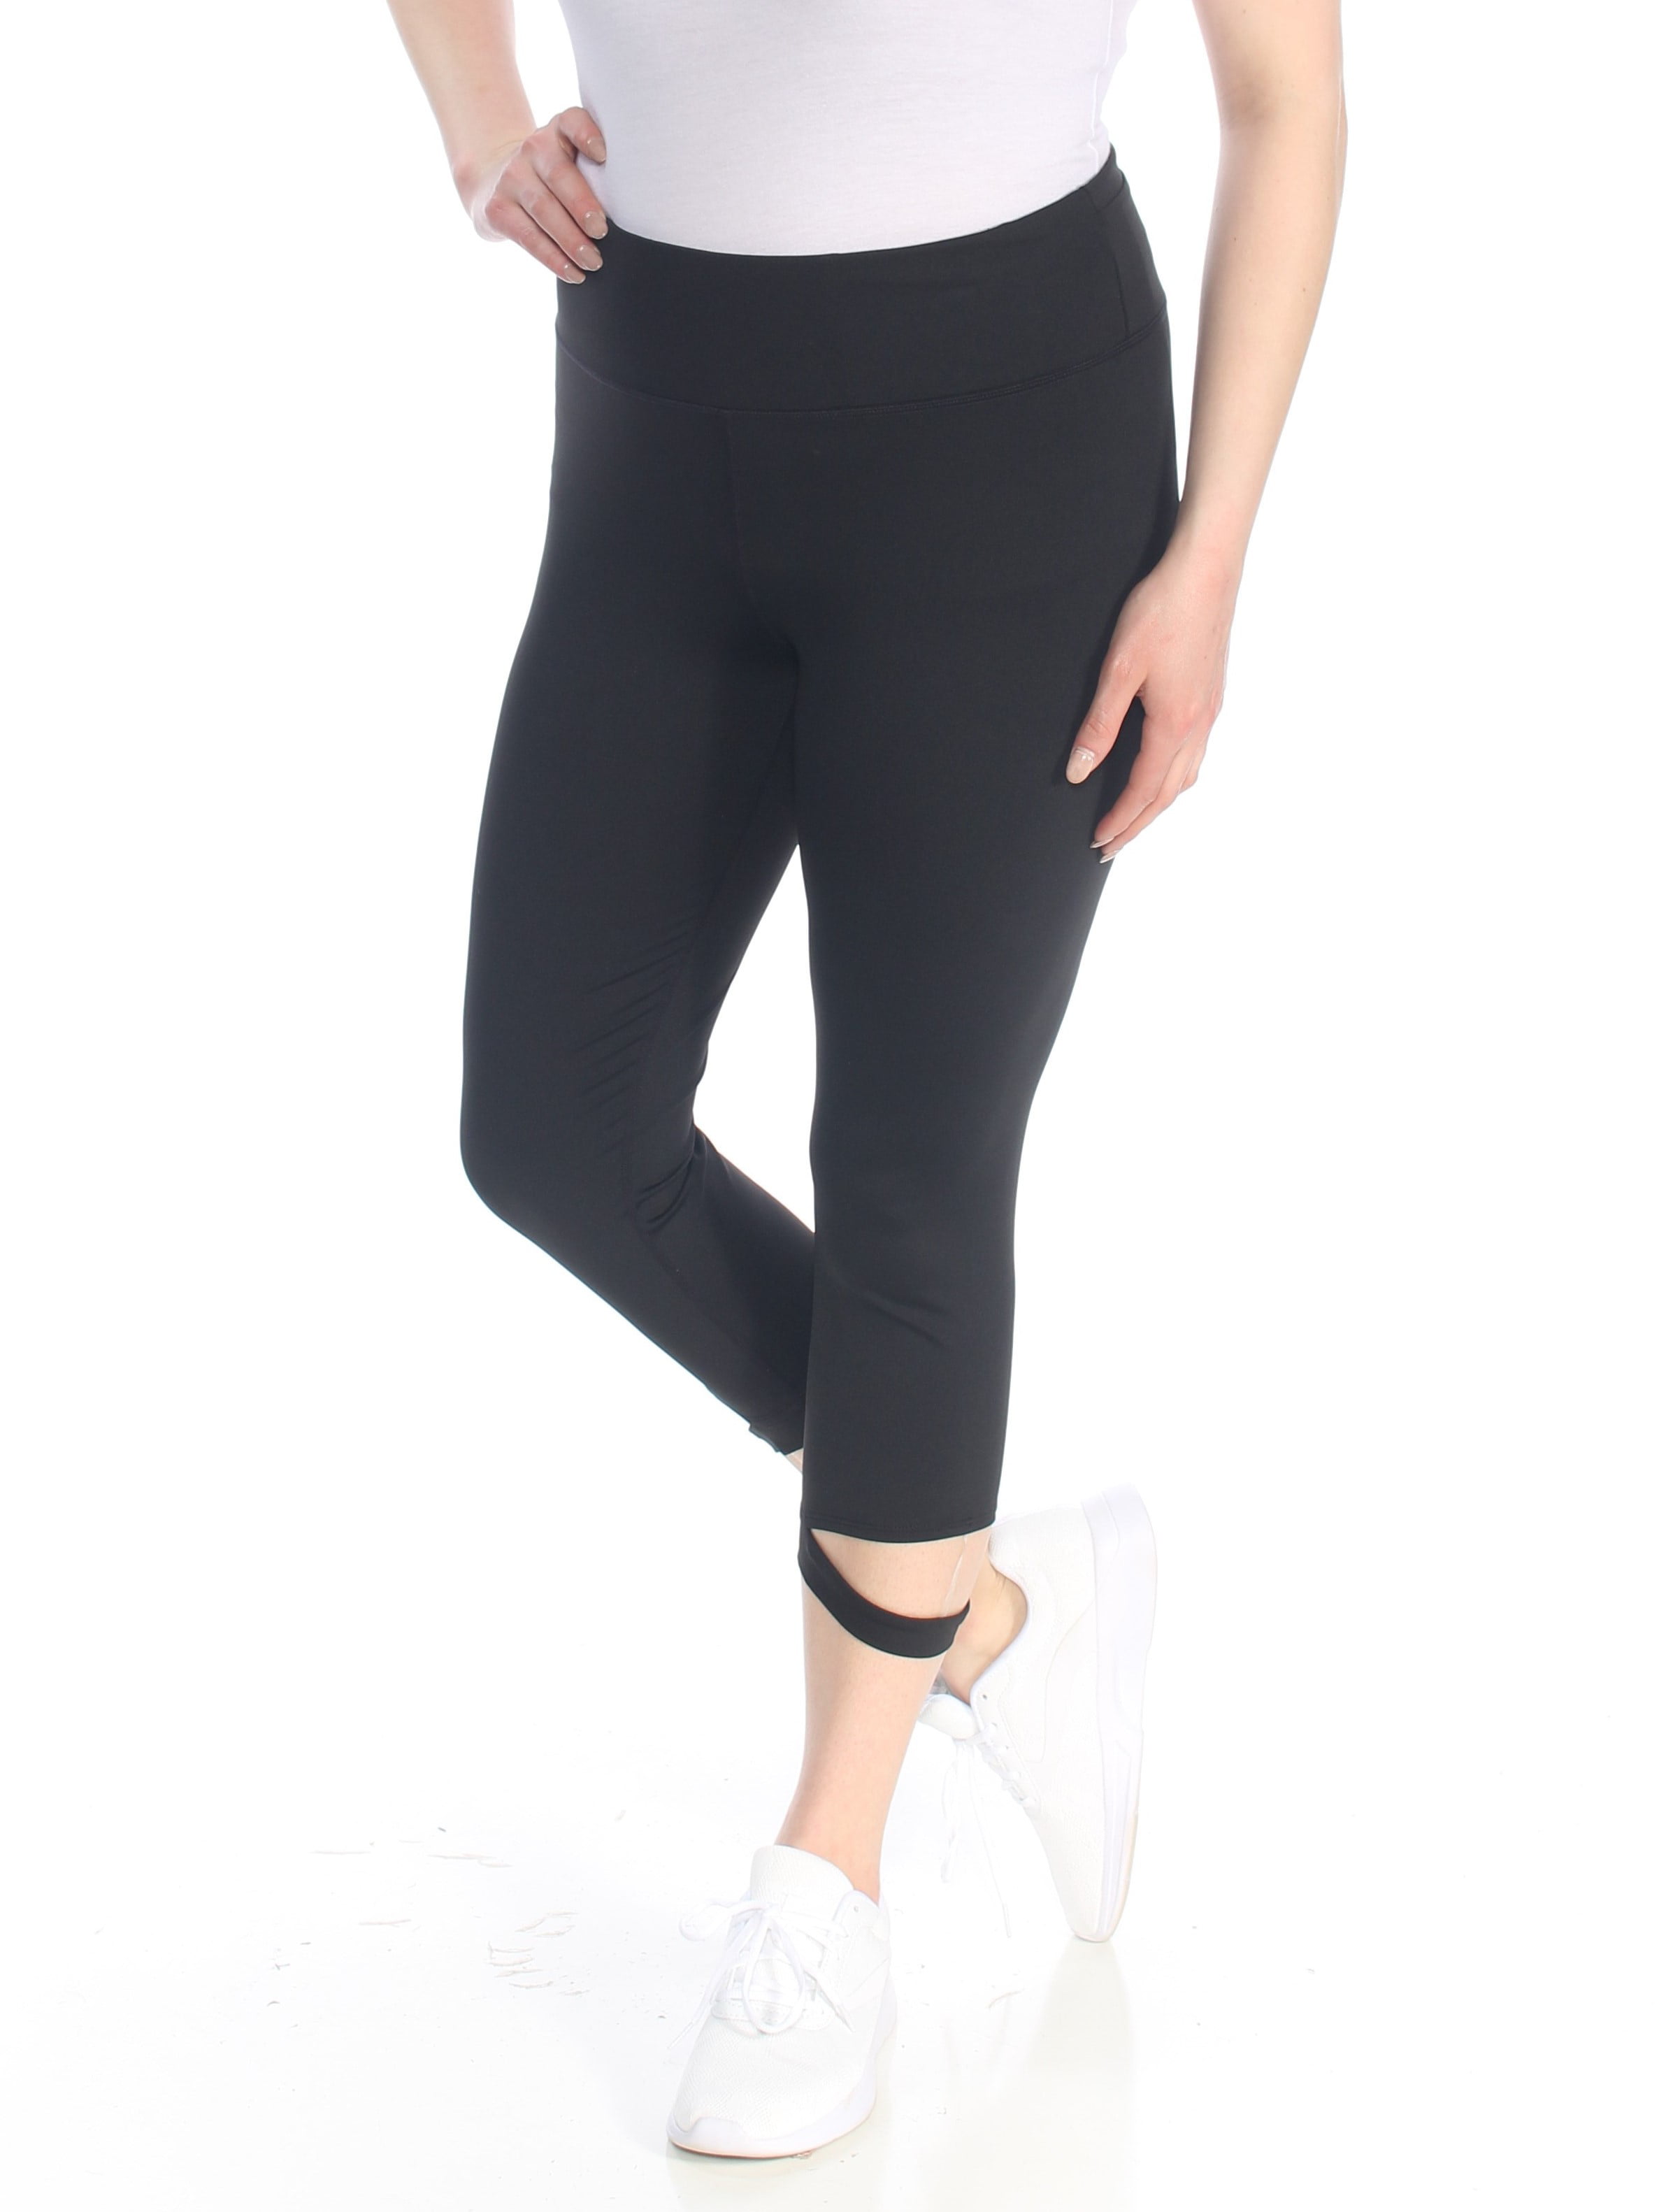 Aerie Crossover Flare Leggings Reviewed